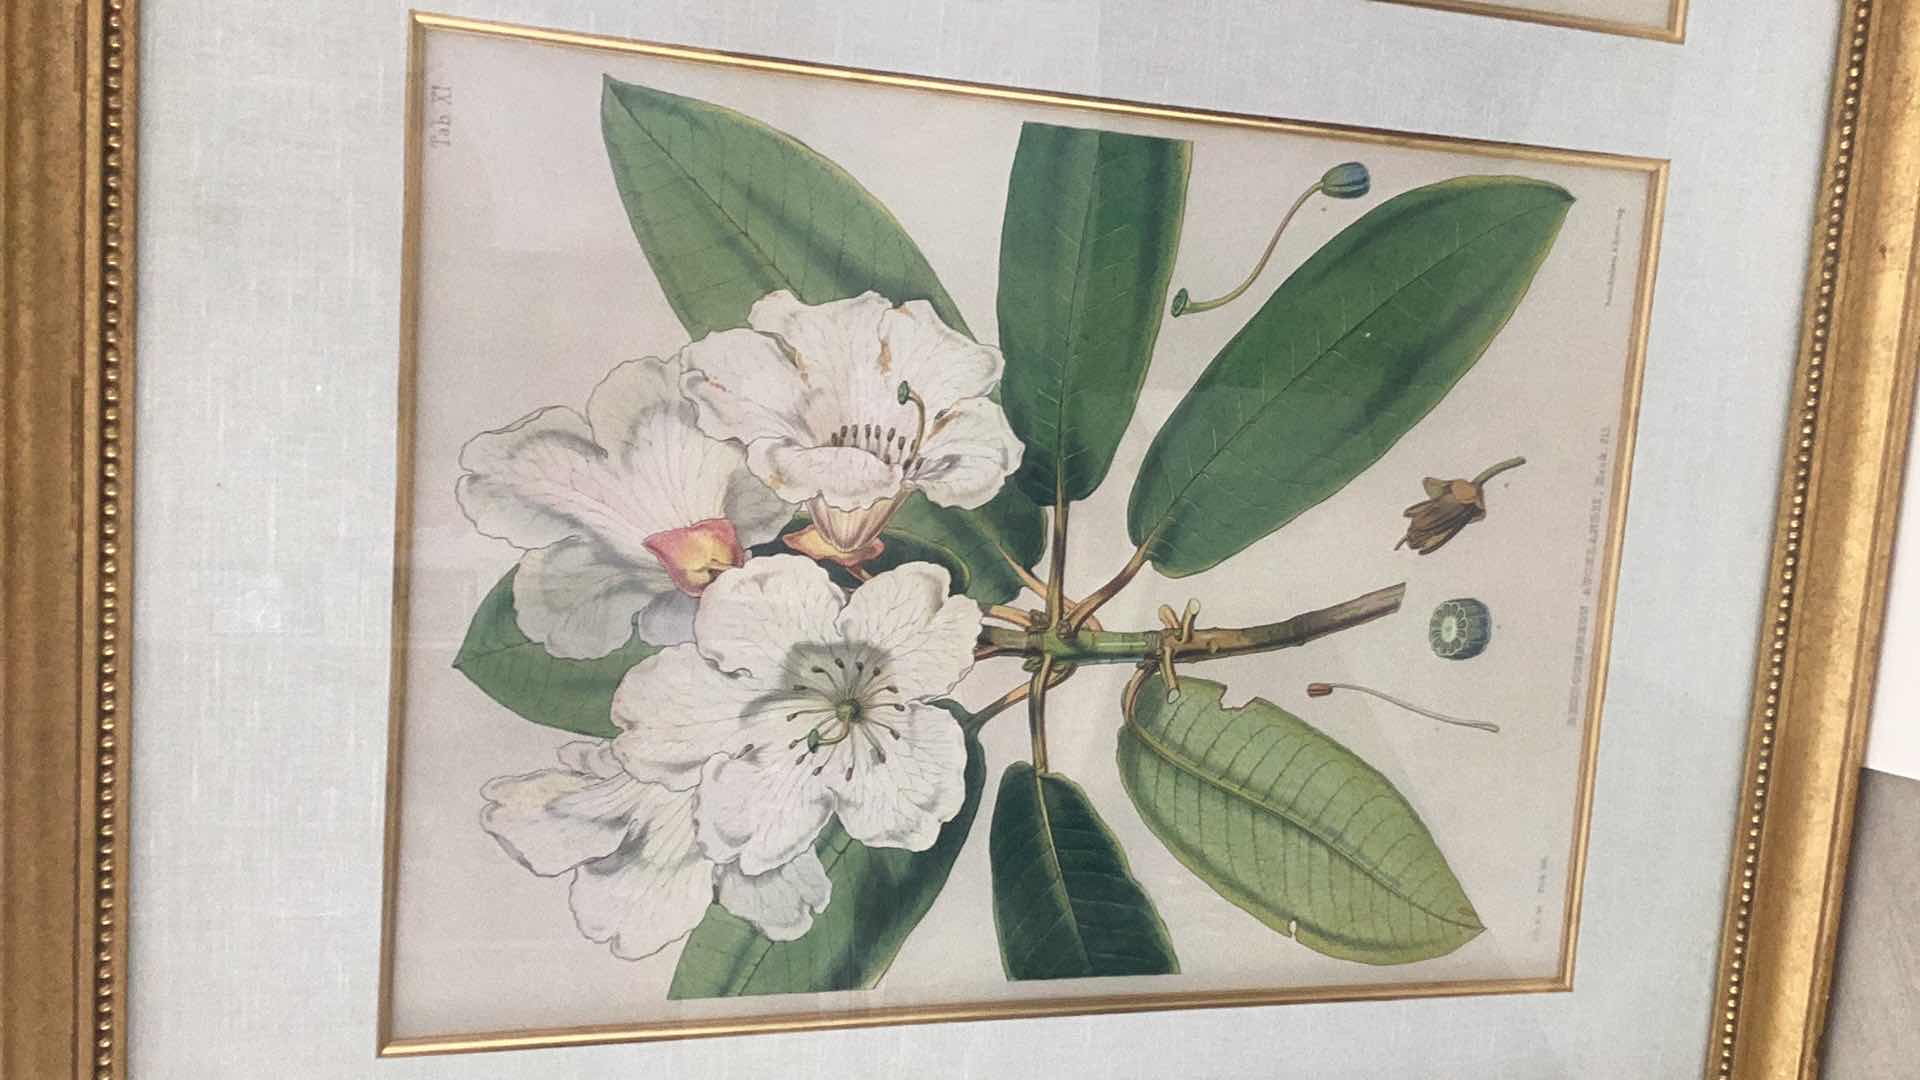 Photo 2 of ANTIQUE 1800’S JOSEPH HOOKER “RHODODENDRON AUCKLAND II, HOOK.FIL” FITCH LITHOGRAPH 51” X H 38”